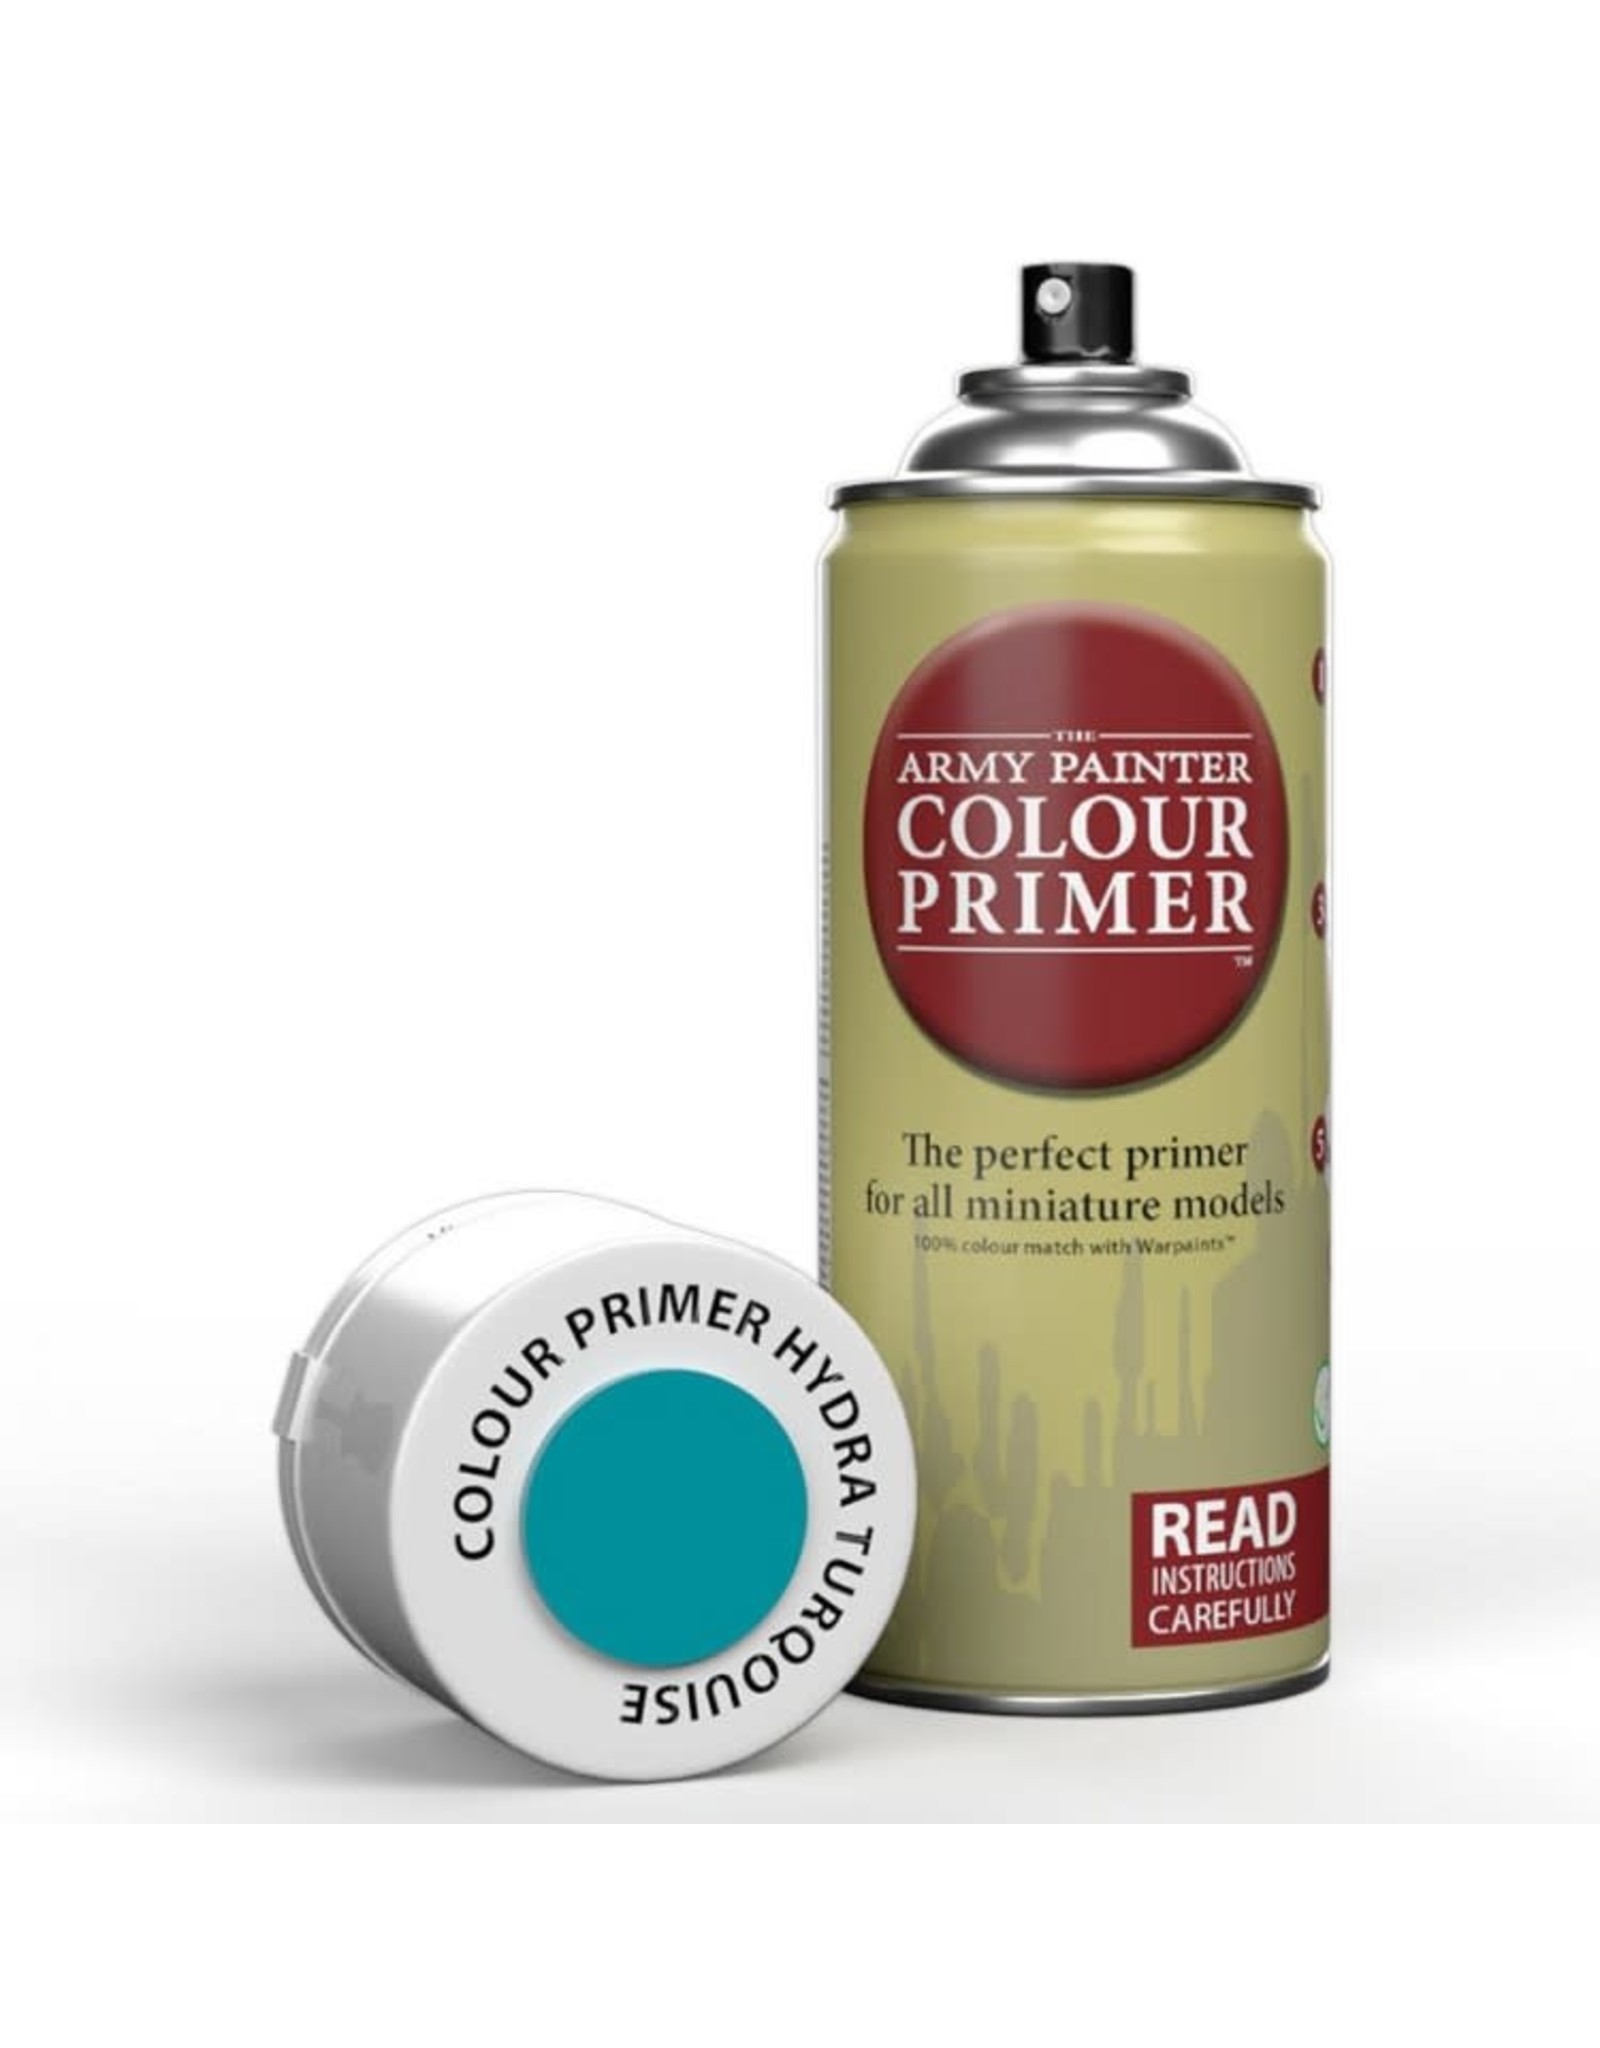 The Army Painter Colour Primer: Hydra Turquoise